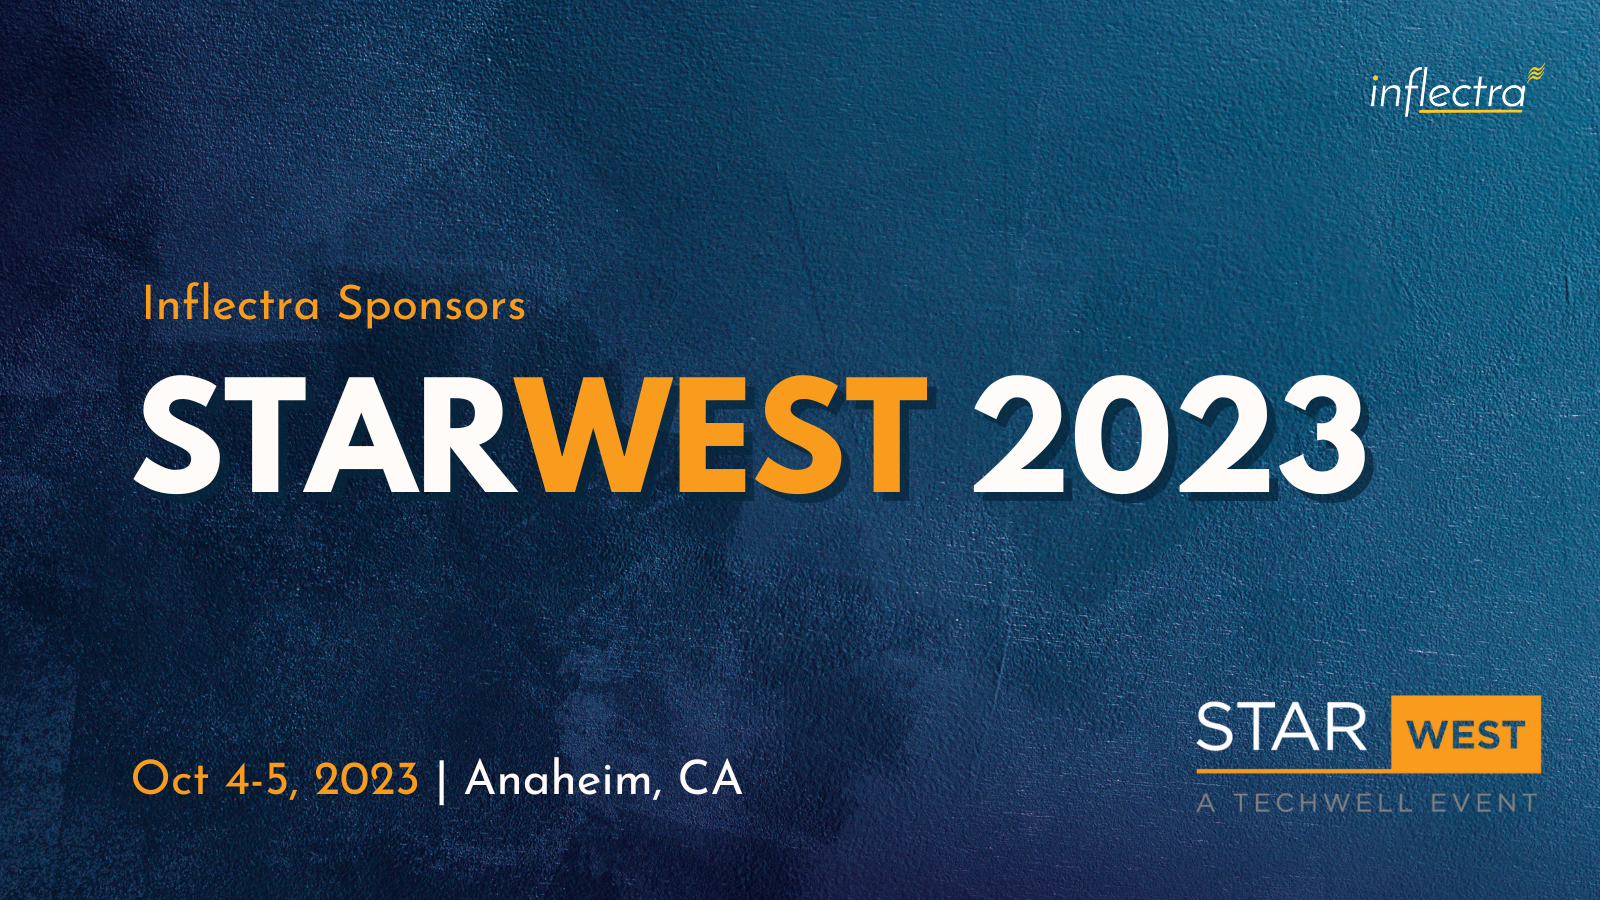 inflectra-sponsors-starwest-conference-in-anaheim-image